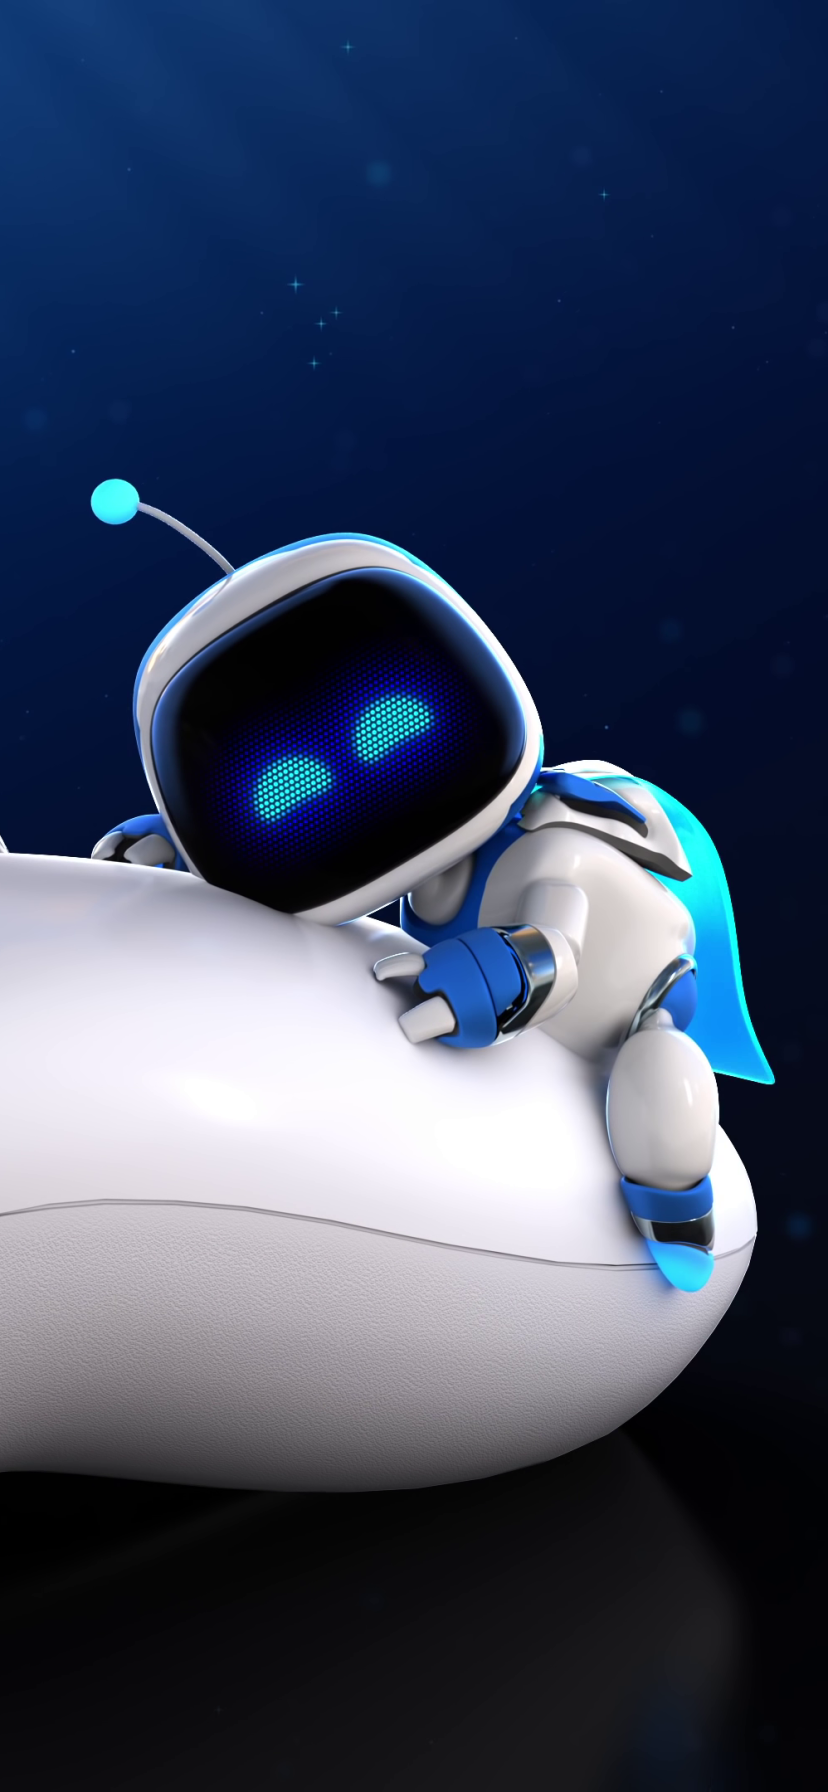 Astro Bot with the PS5 controller